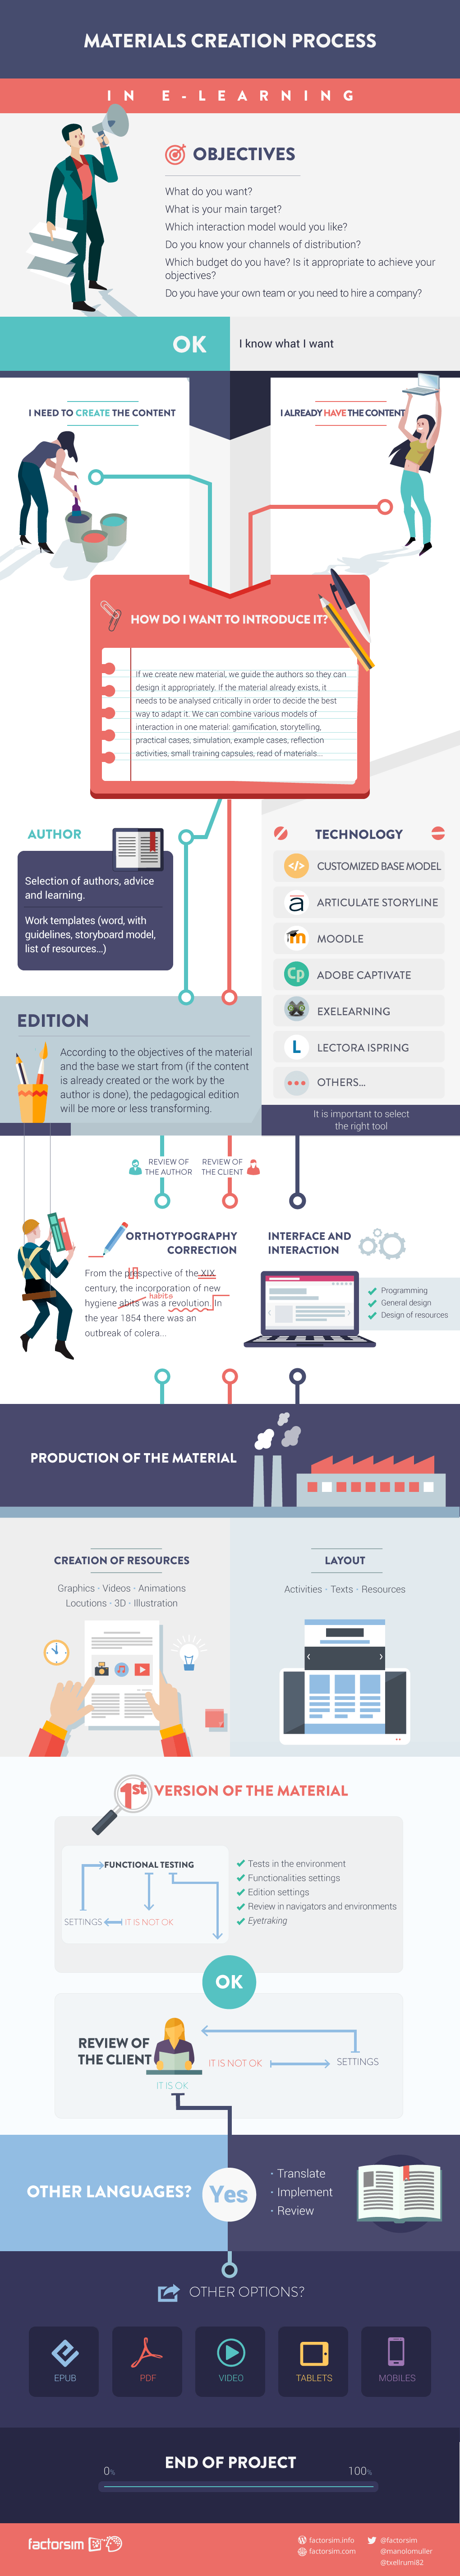 Effective-Materials-Creation-Process-in-eLearning-Infographic.png